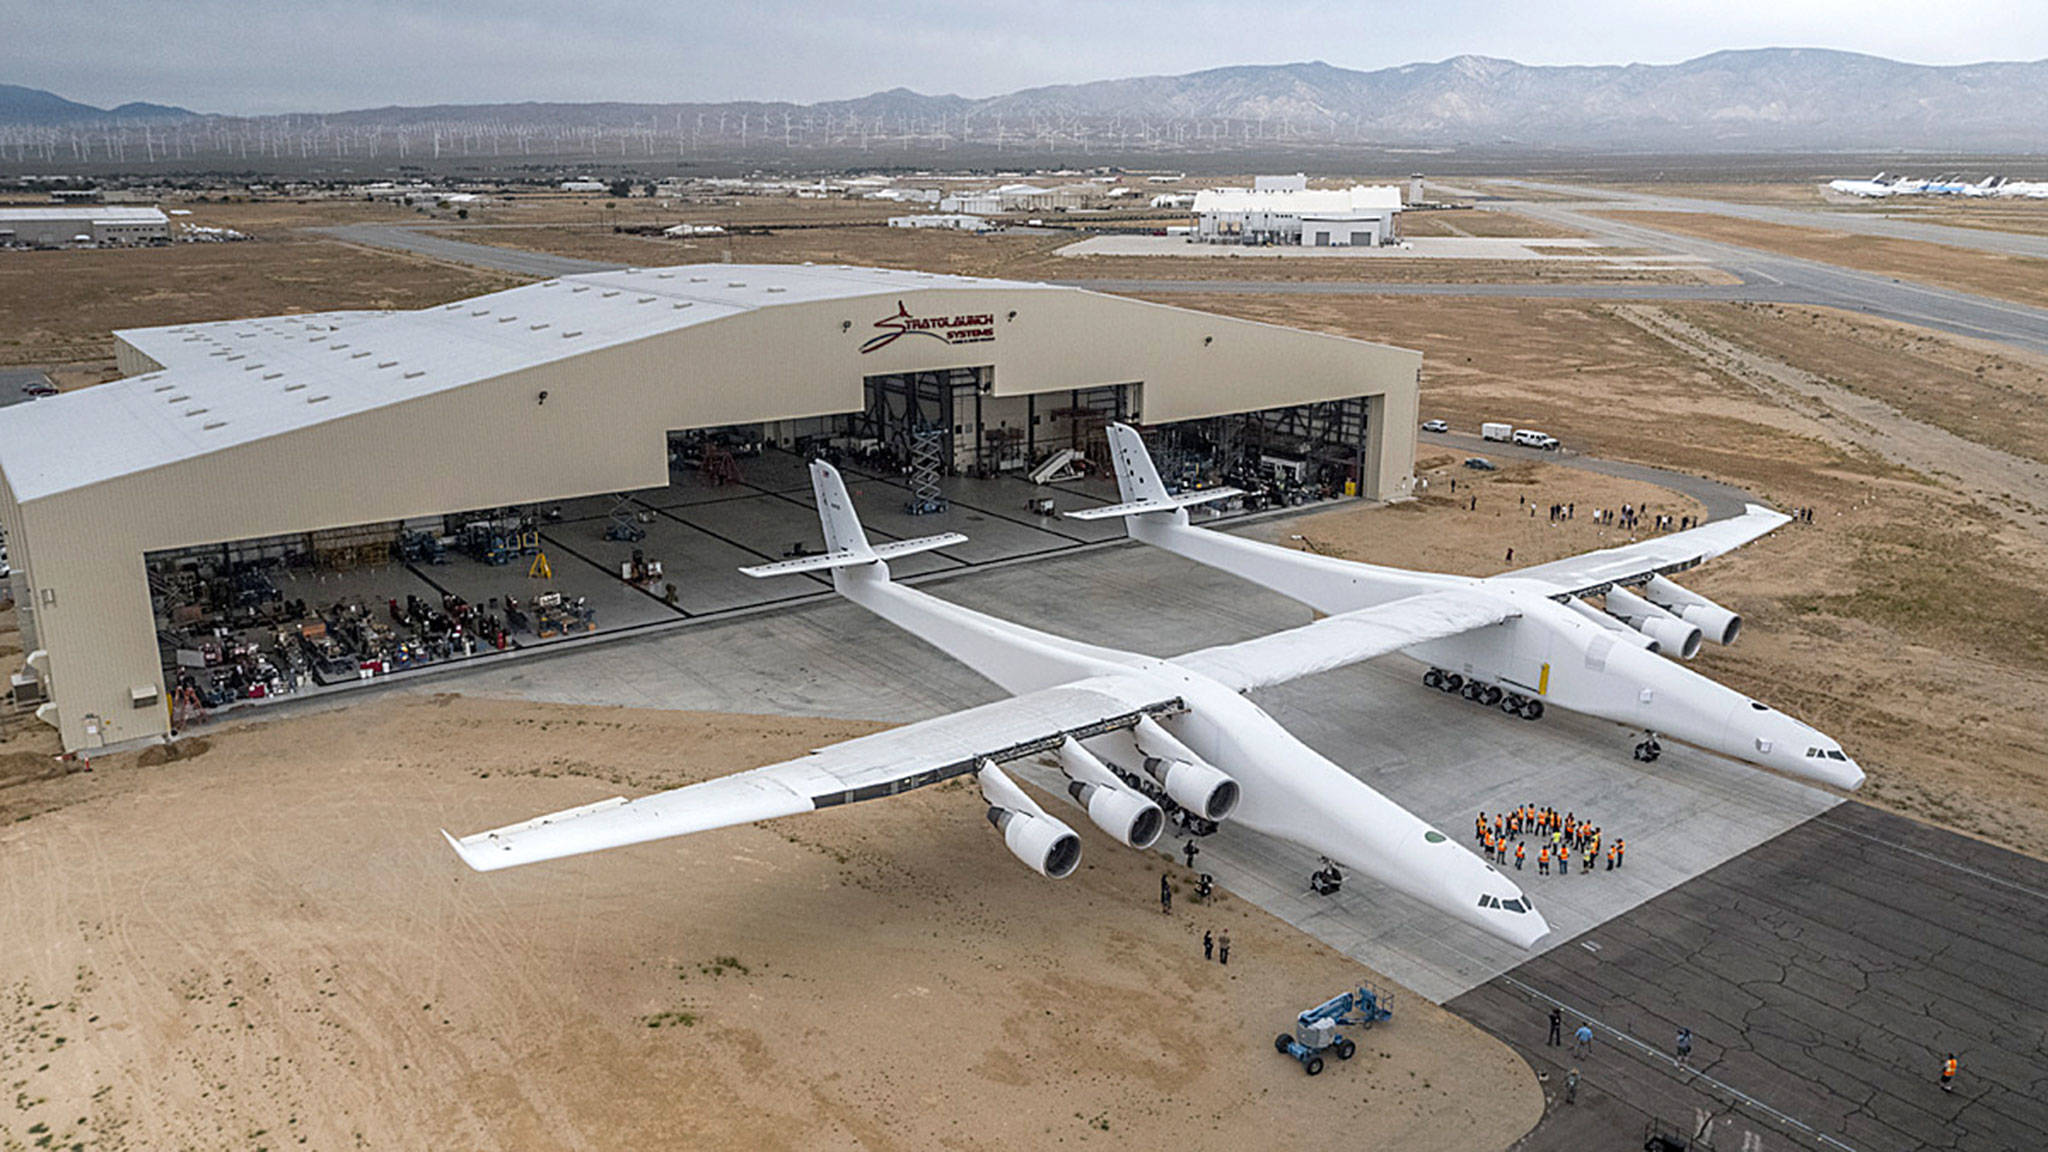 Paul Allen’s Stratolaunch airplane emerges from its hangar in Mojave, California, on Wednesday. (Stratolaunch Systems Corp.)